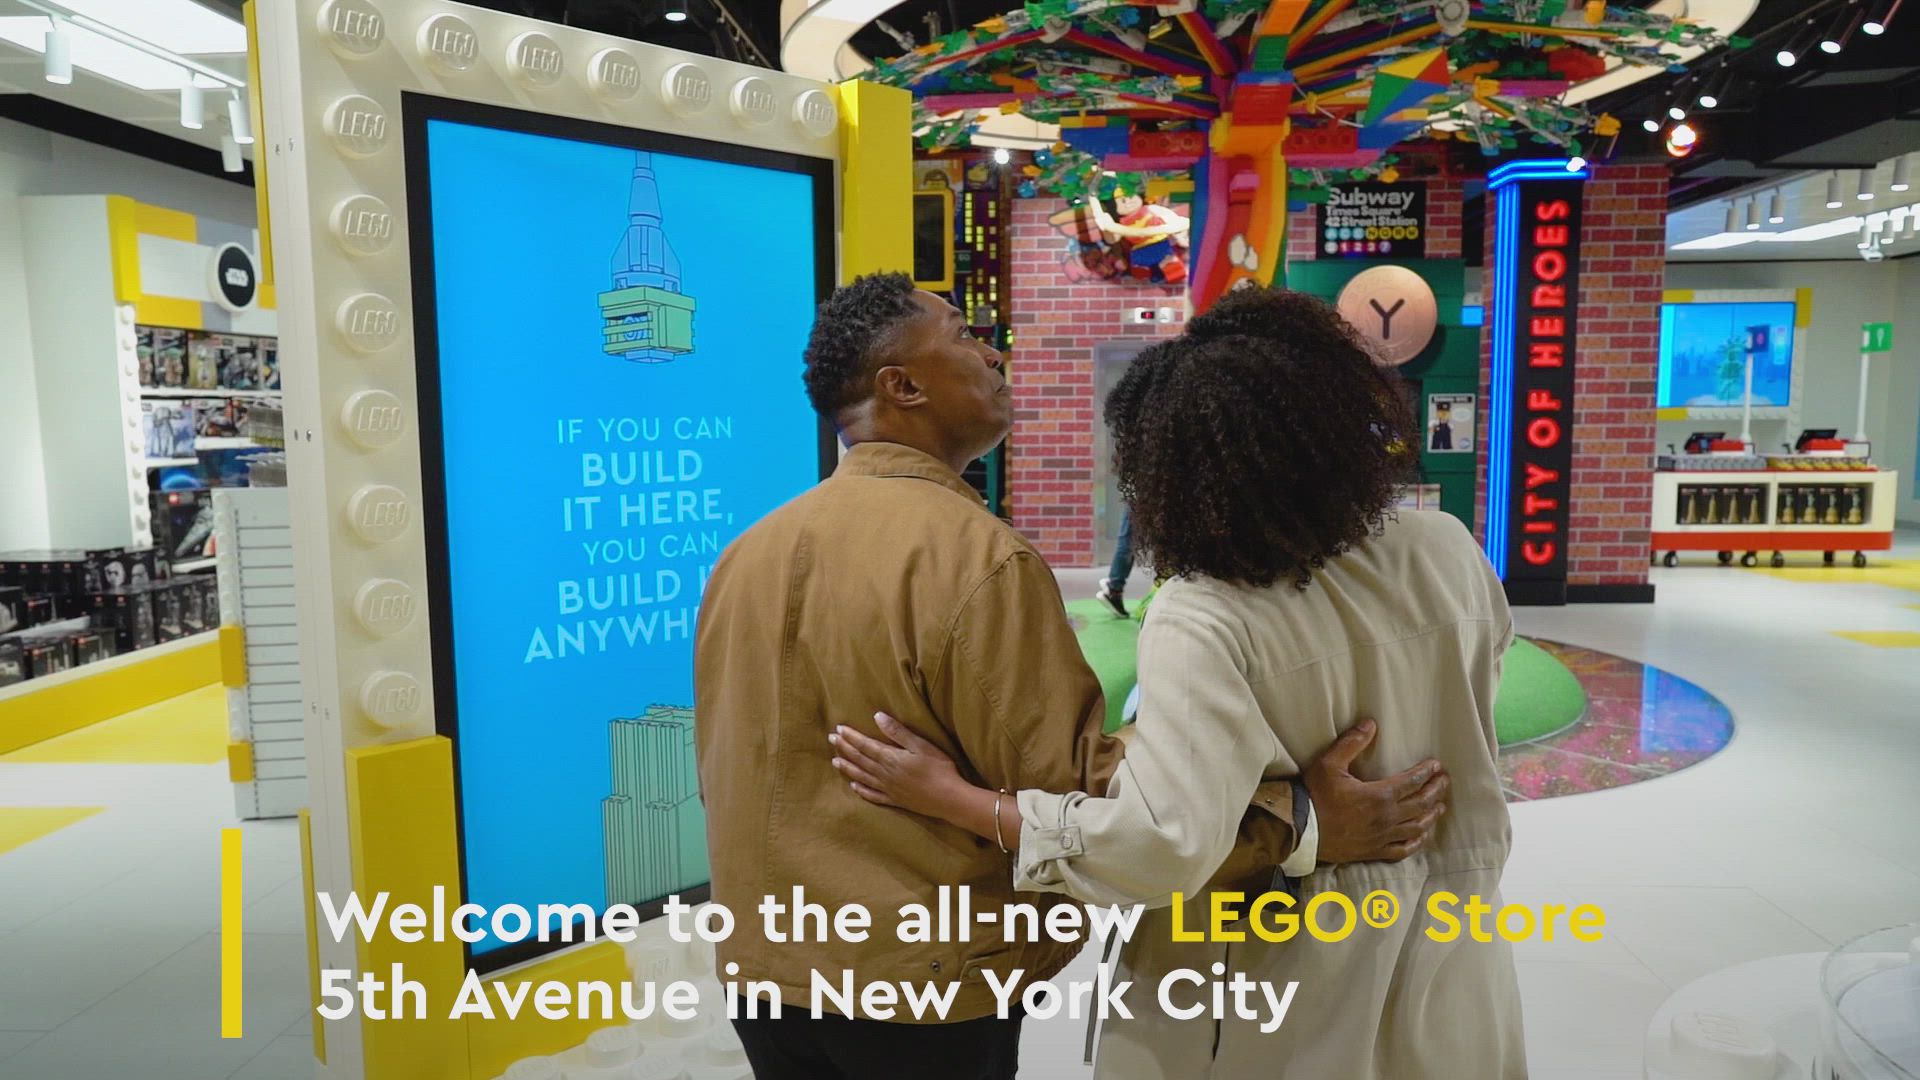 LEGO Reveals New York Flagship Store on Fifth Avenue - The Brick Fan